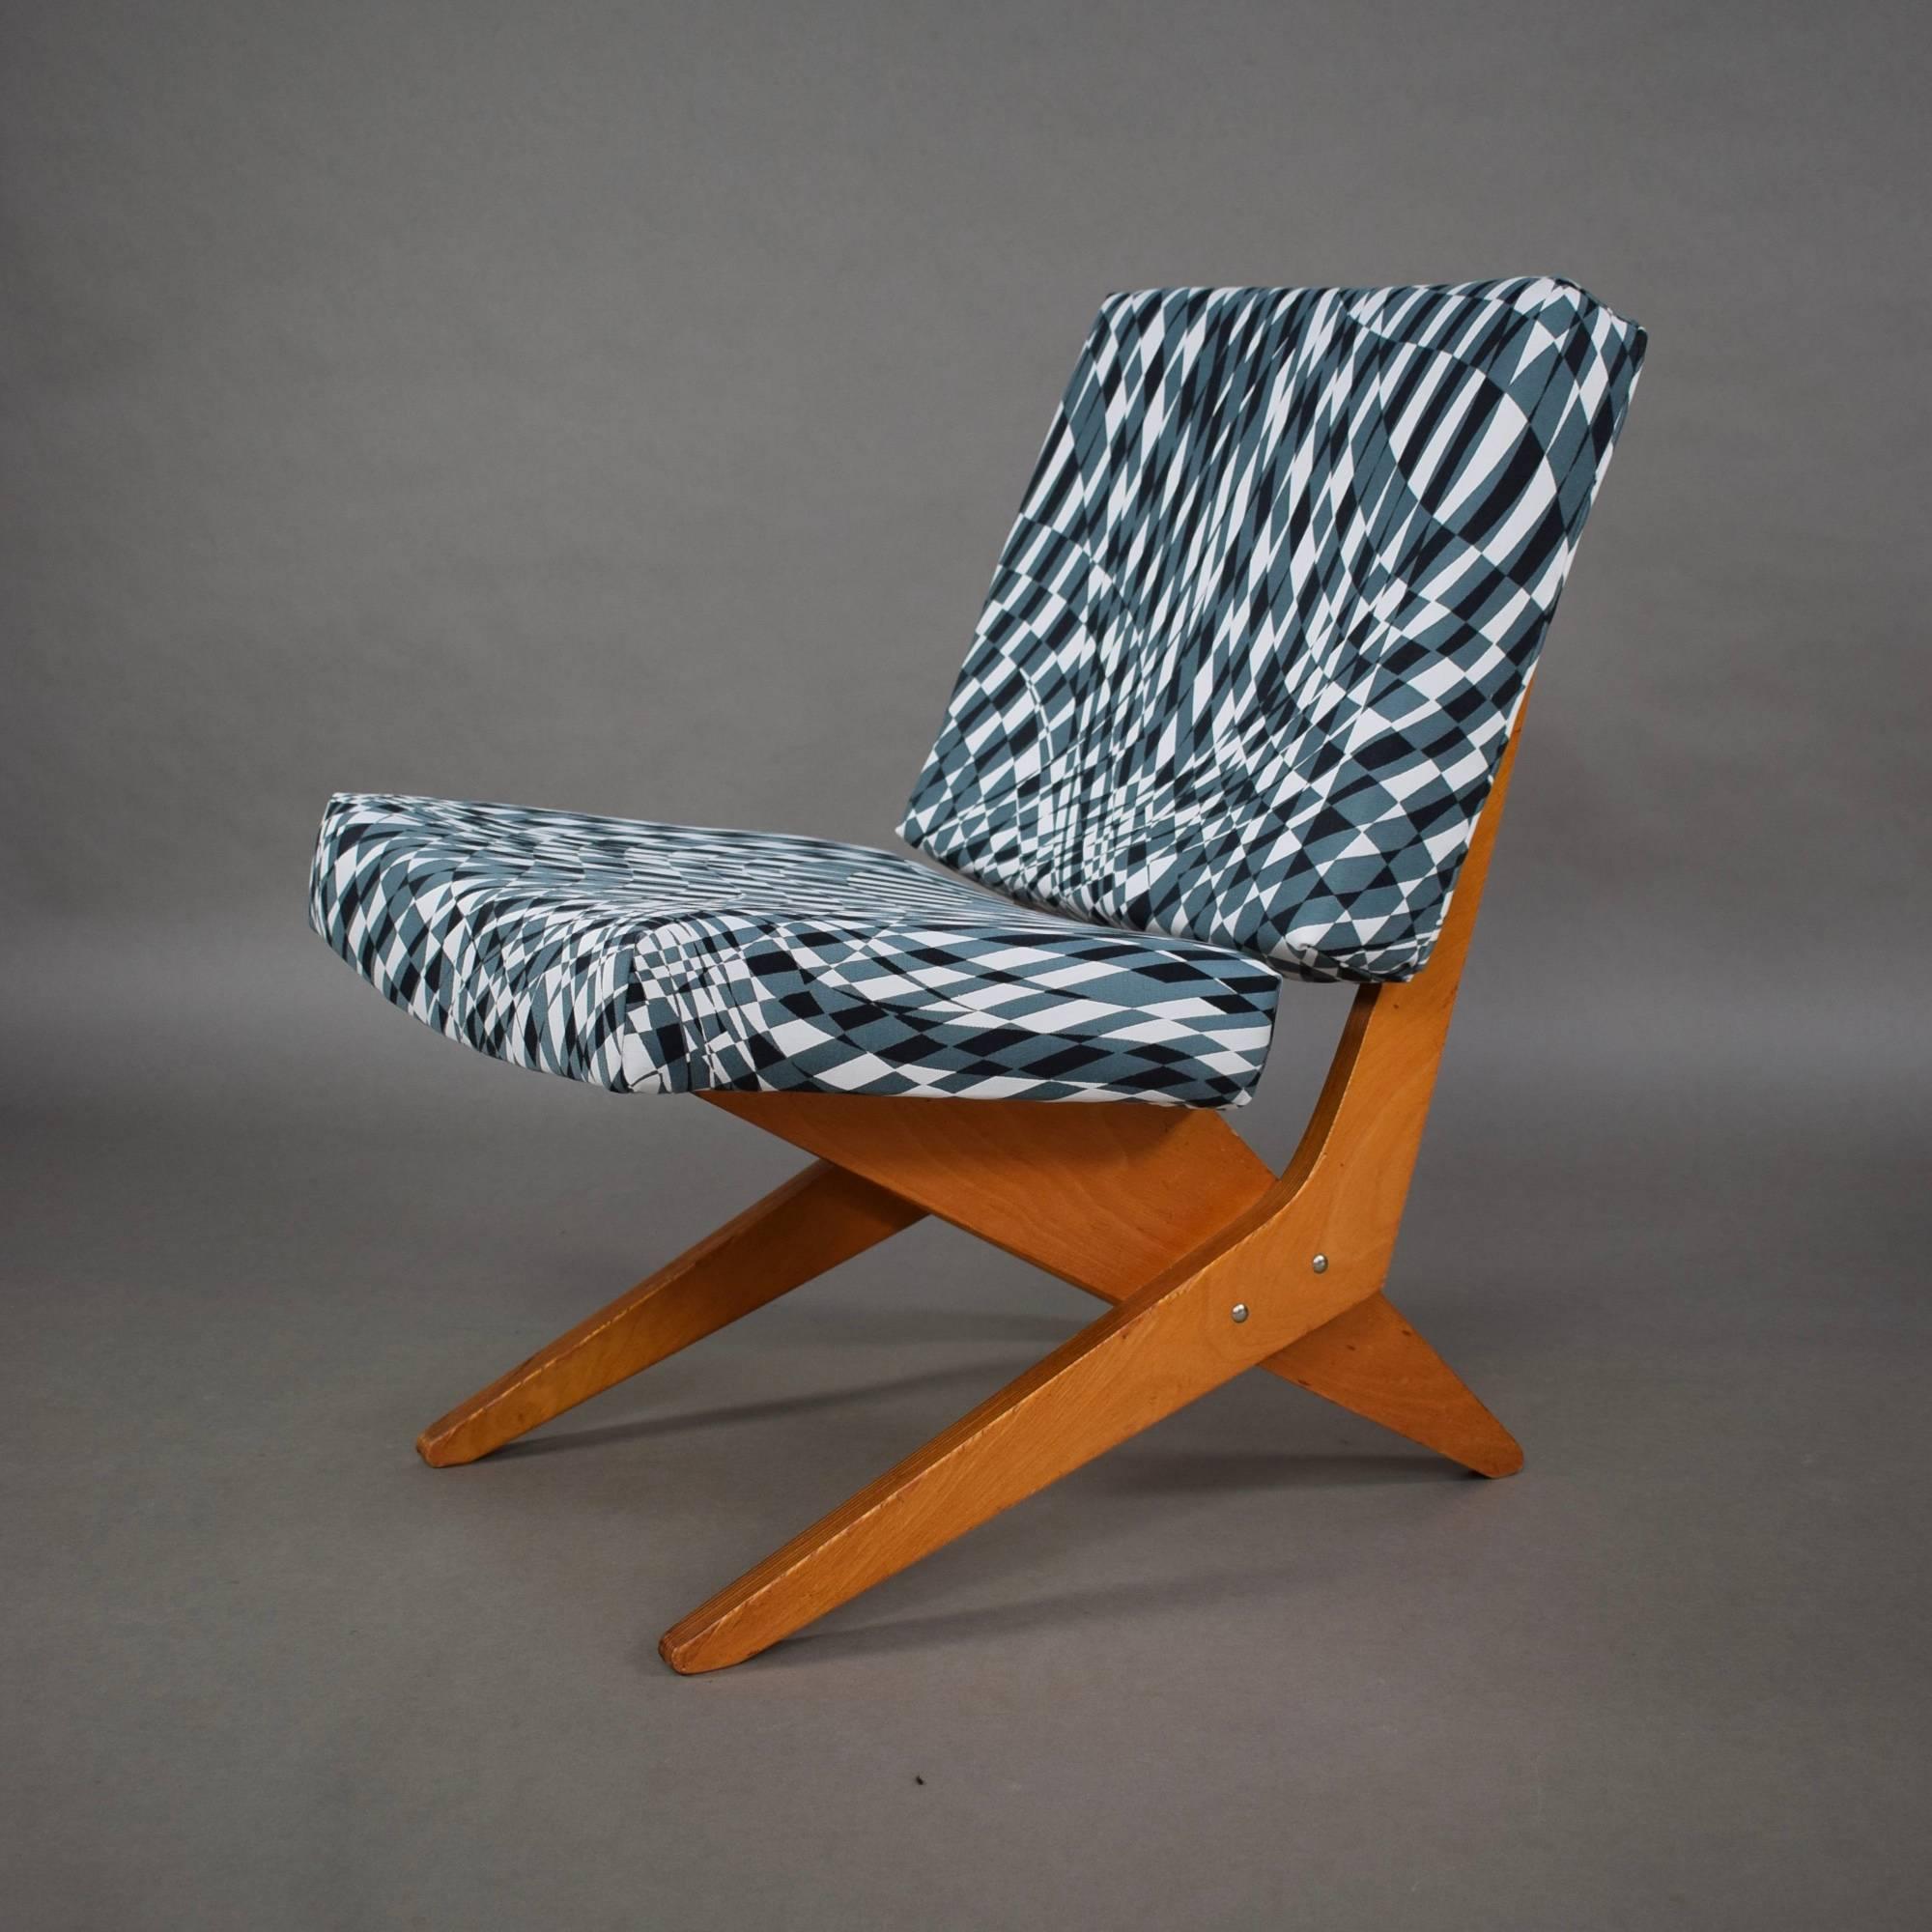 Very nice scissor chair by Jan Van Grunsven for Pastoe, 1957, with new foam seats and upholstery!

Manufacturer: Pastoe
Designer: Jan van Grunsven
Country: Netherlands
Model: FB18 scissor lounge chair
Material: Birch / New fabric upholstery